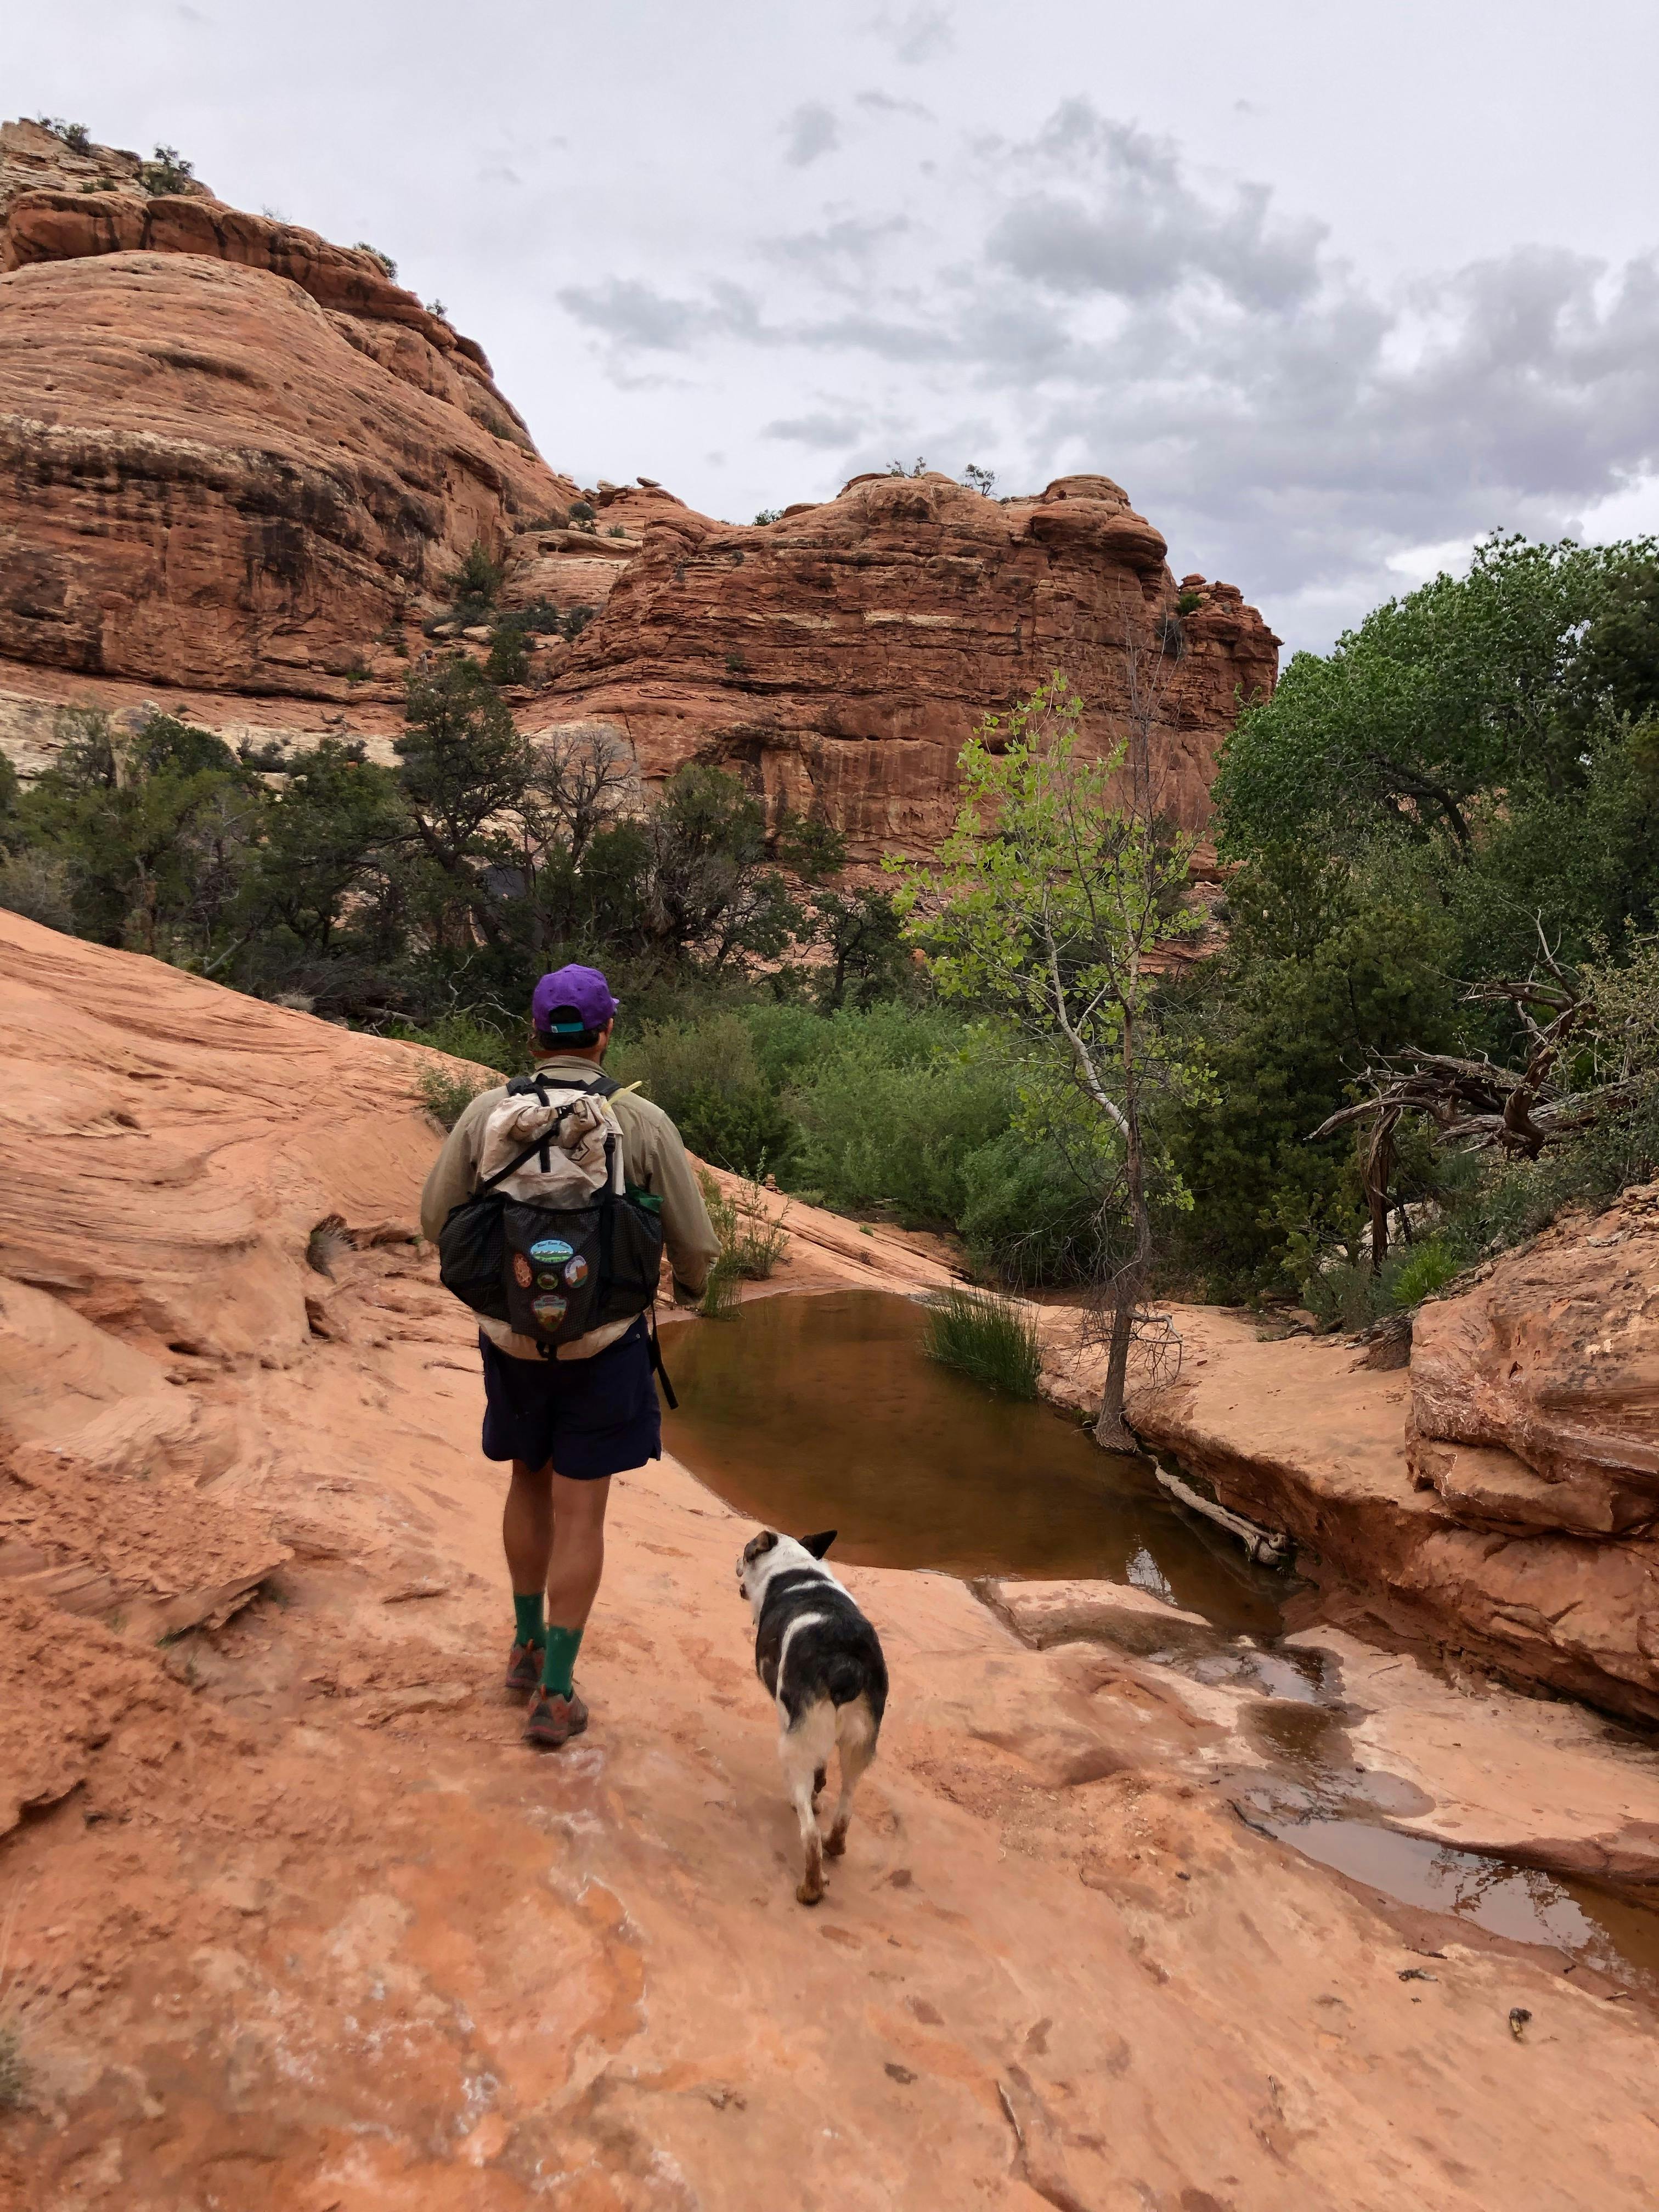 Make sure your dog is prepped and ready to hike, too.  Pic cred: Alexi Kimiatek, Wildland Trekking